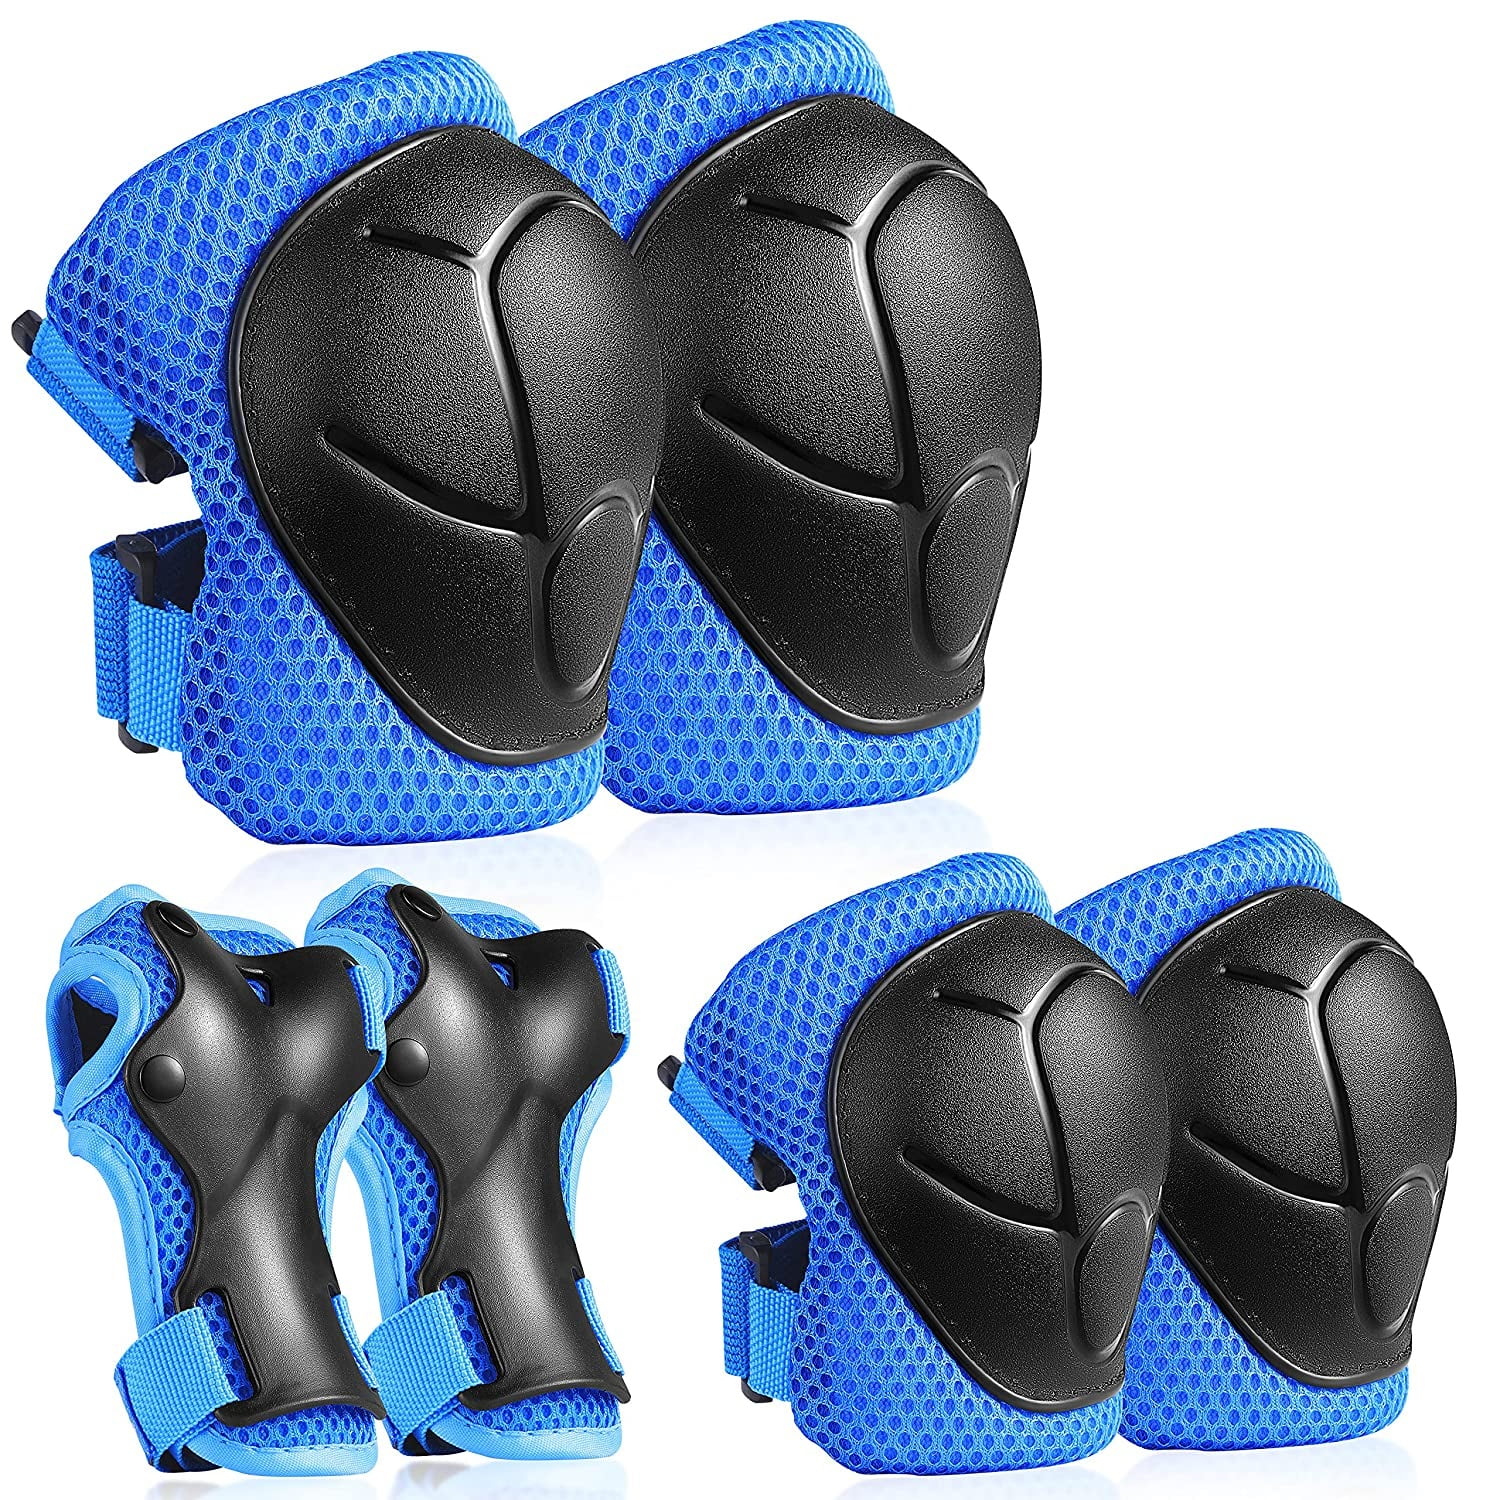 Details about   4X Knee Elbow Protector Thickening Sponge Protective Pad For Cycling Gear Hot 